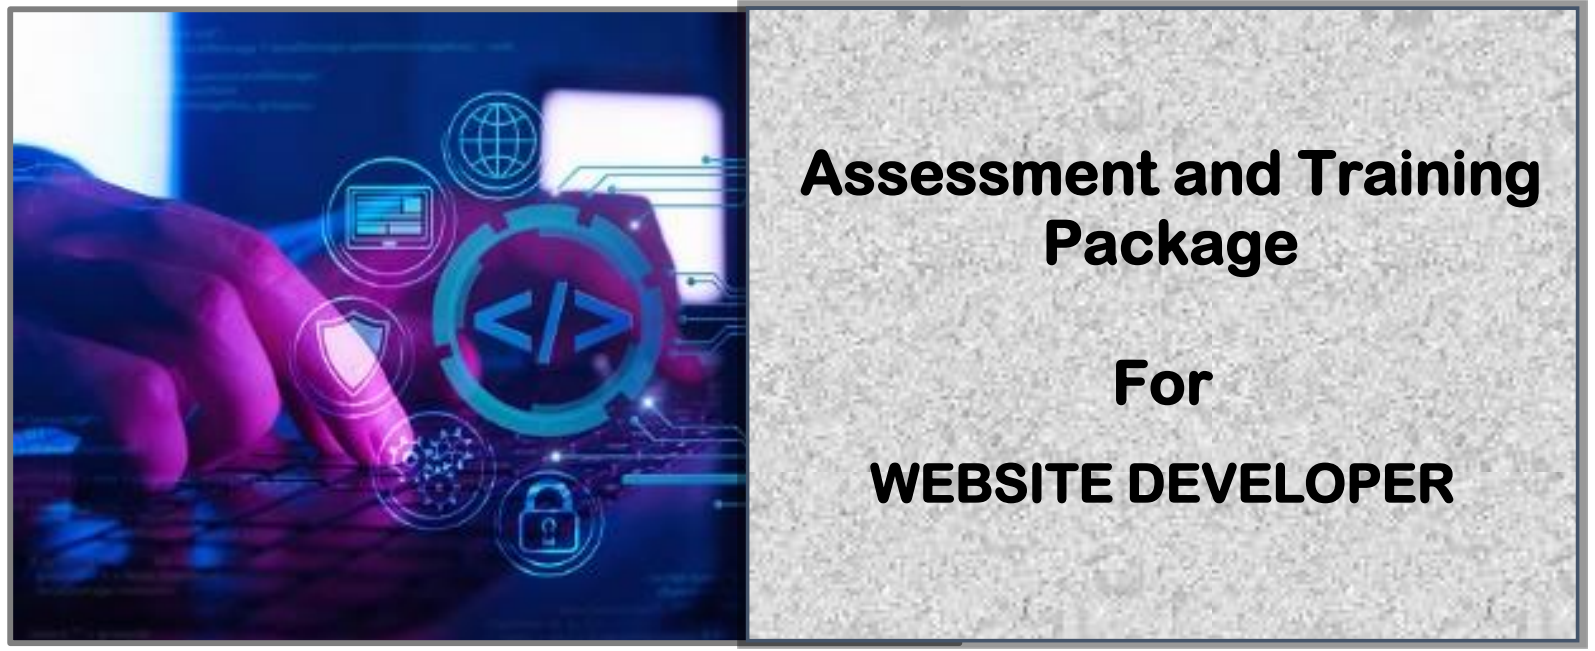 DIT-ASSESSMENT AND TRAINING PACKAGE FOR A WEBSITE DEVELOPER